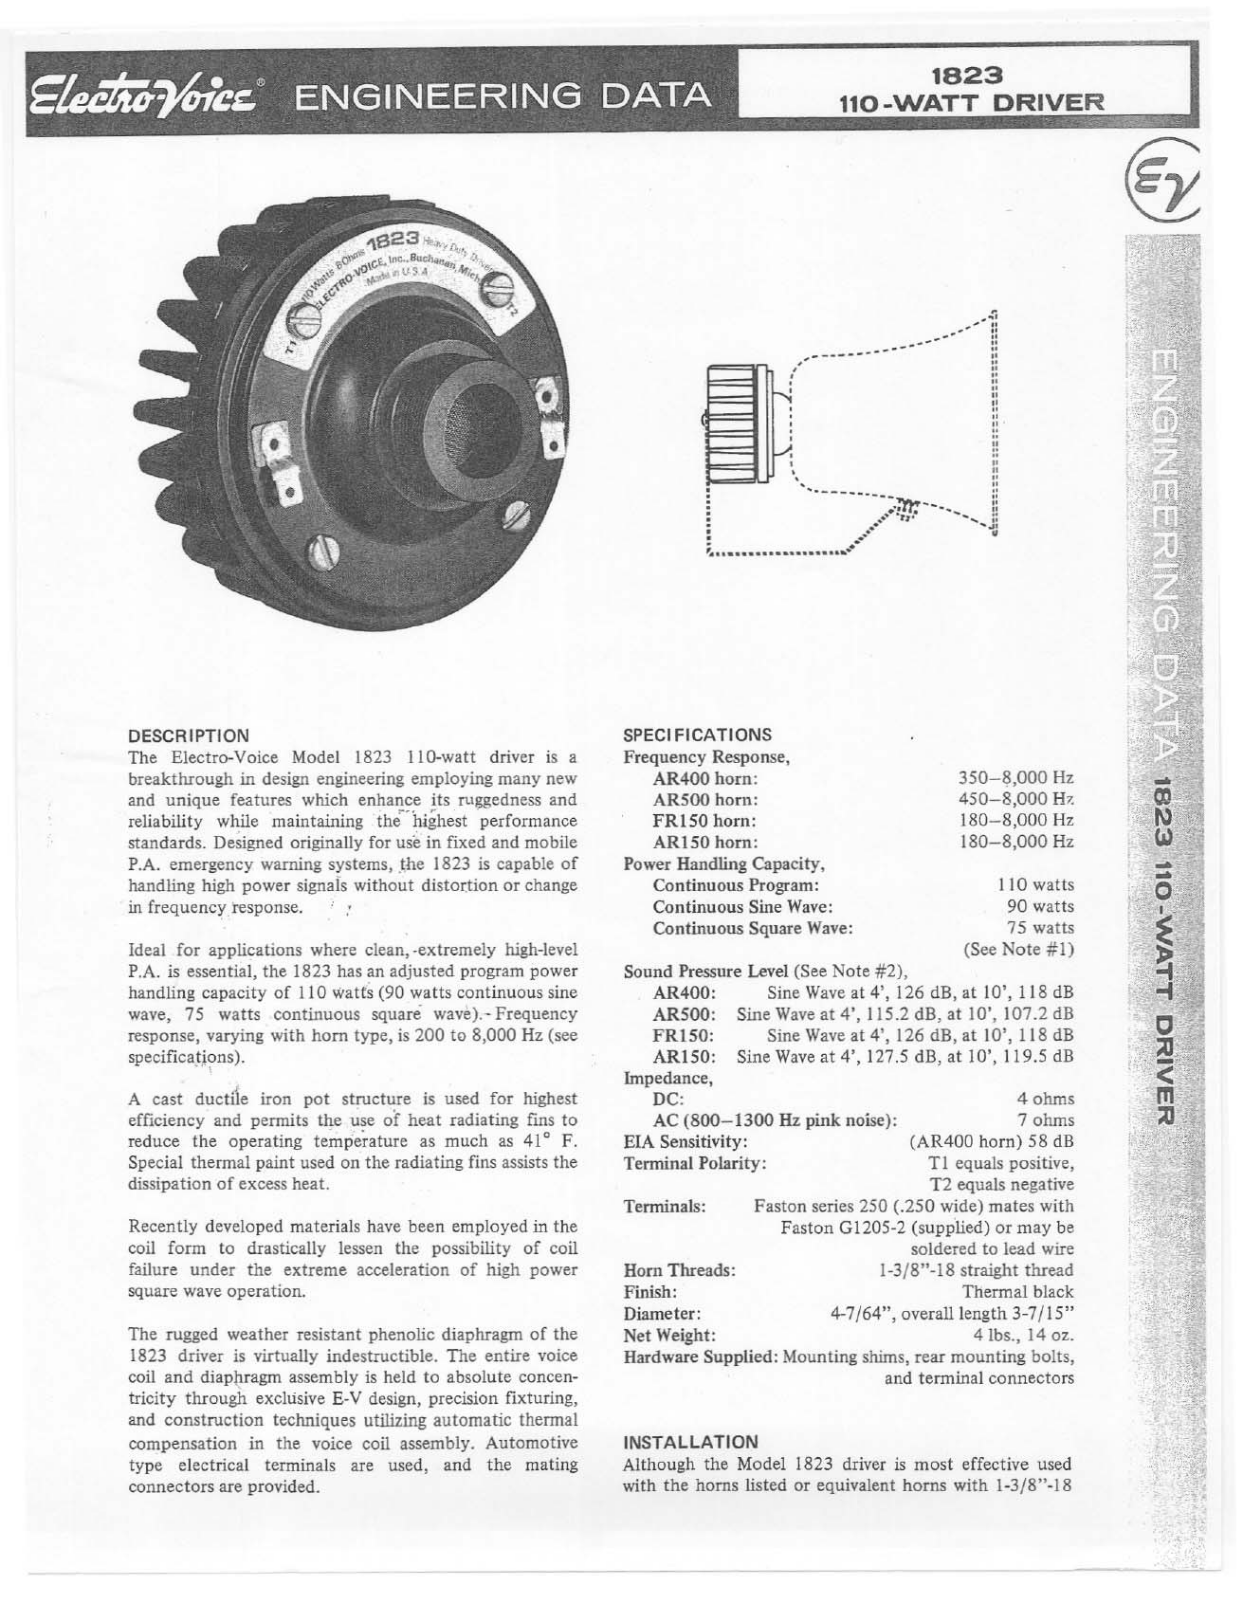 Electro-voice 1823 specification and instructions